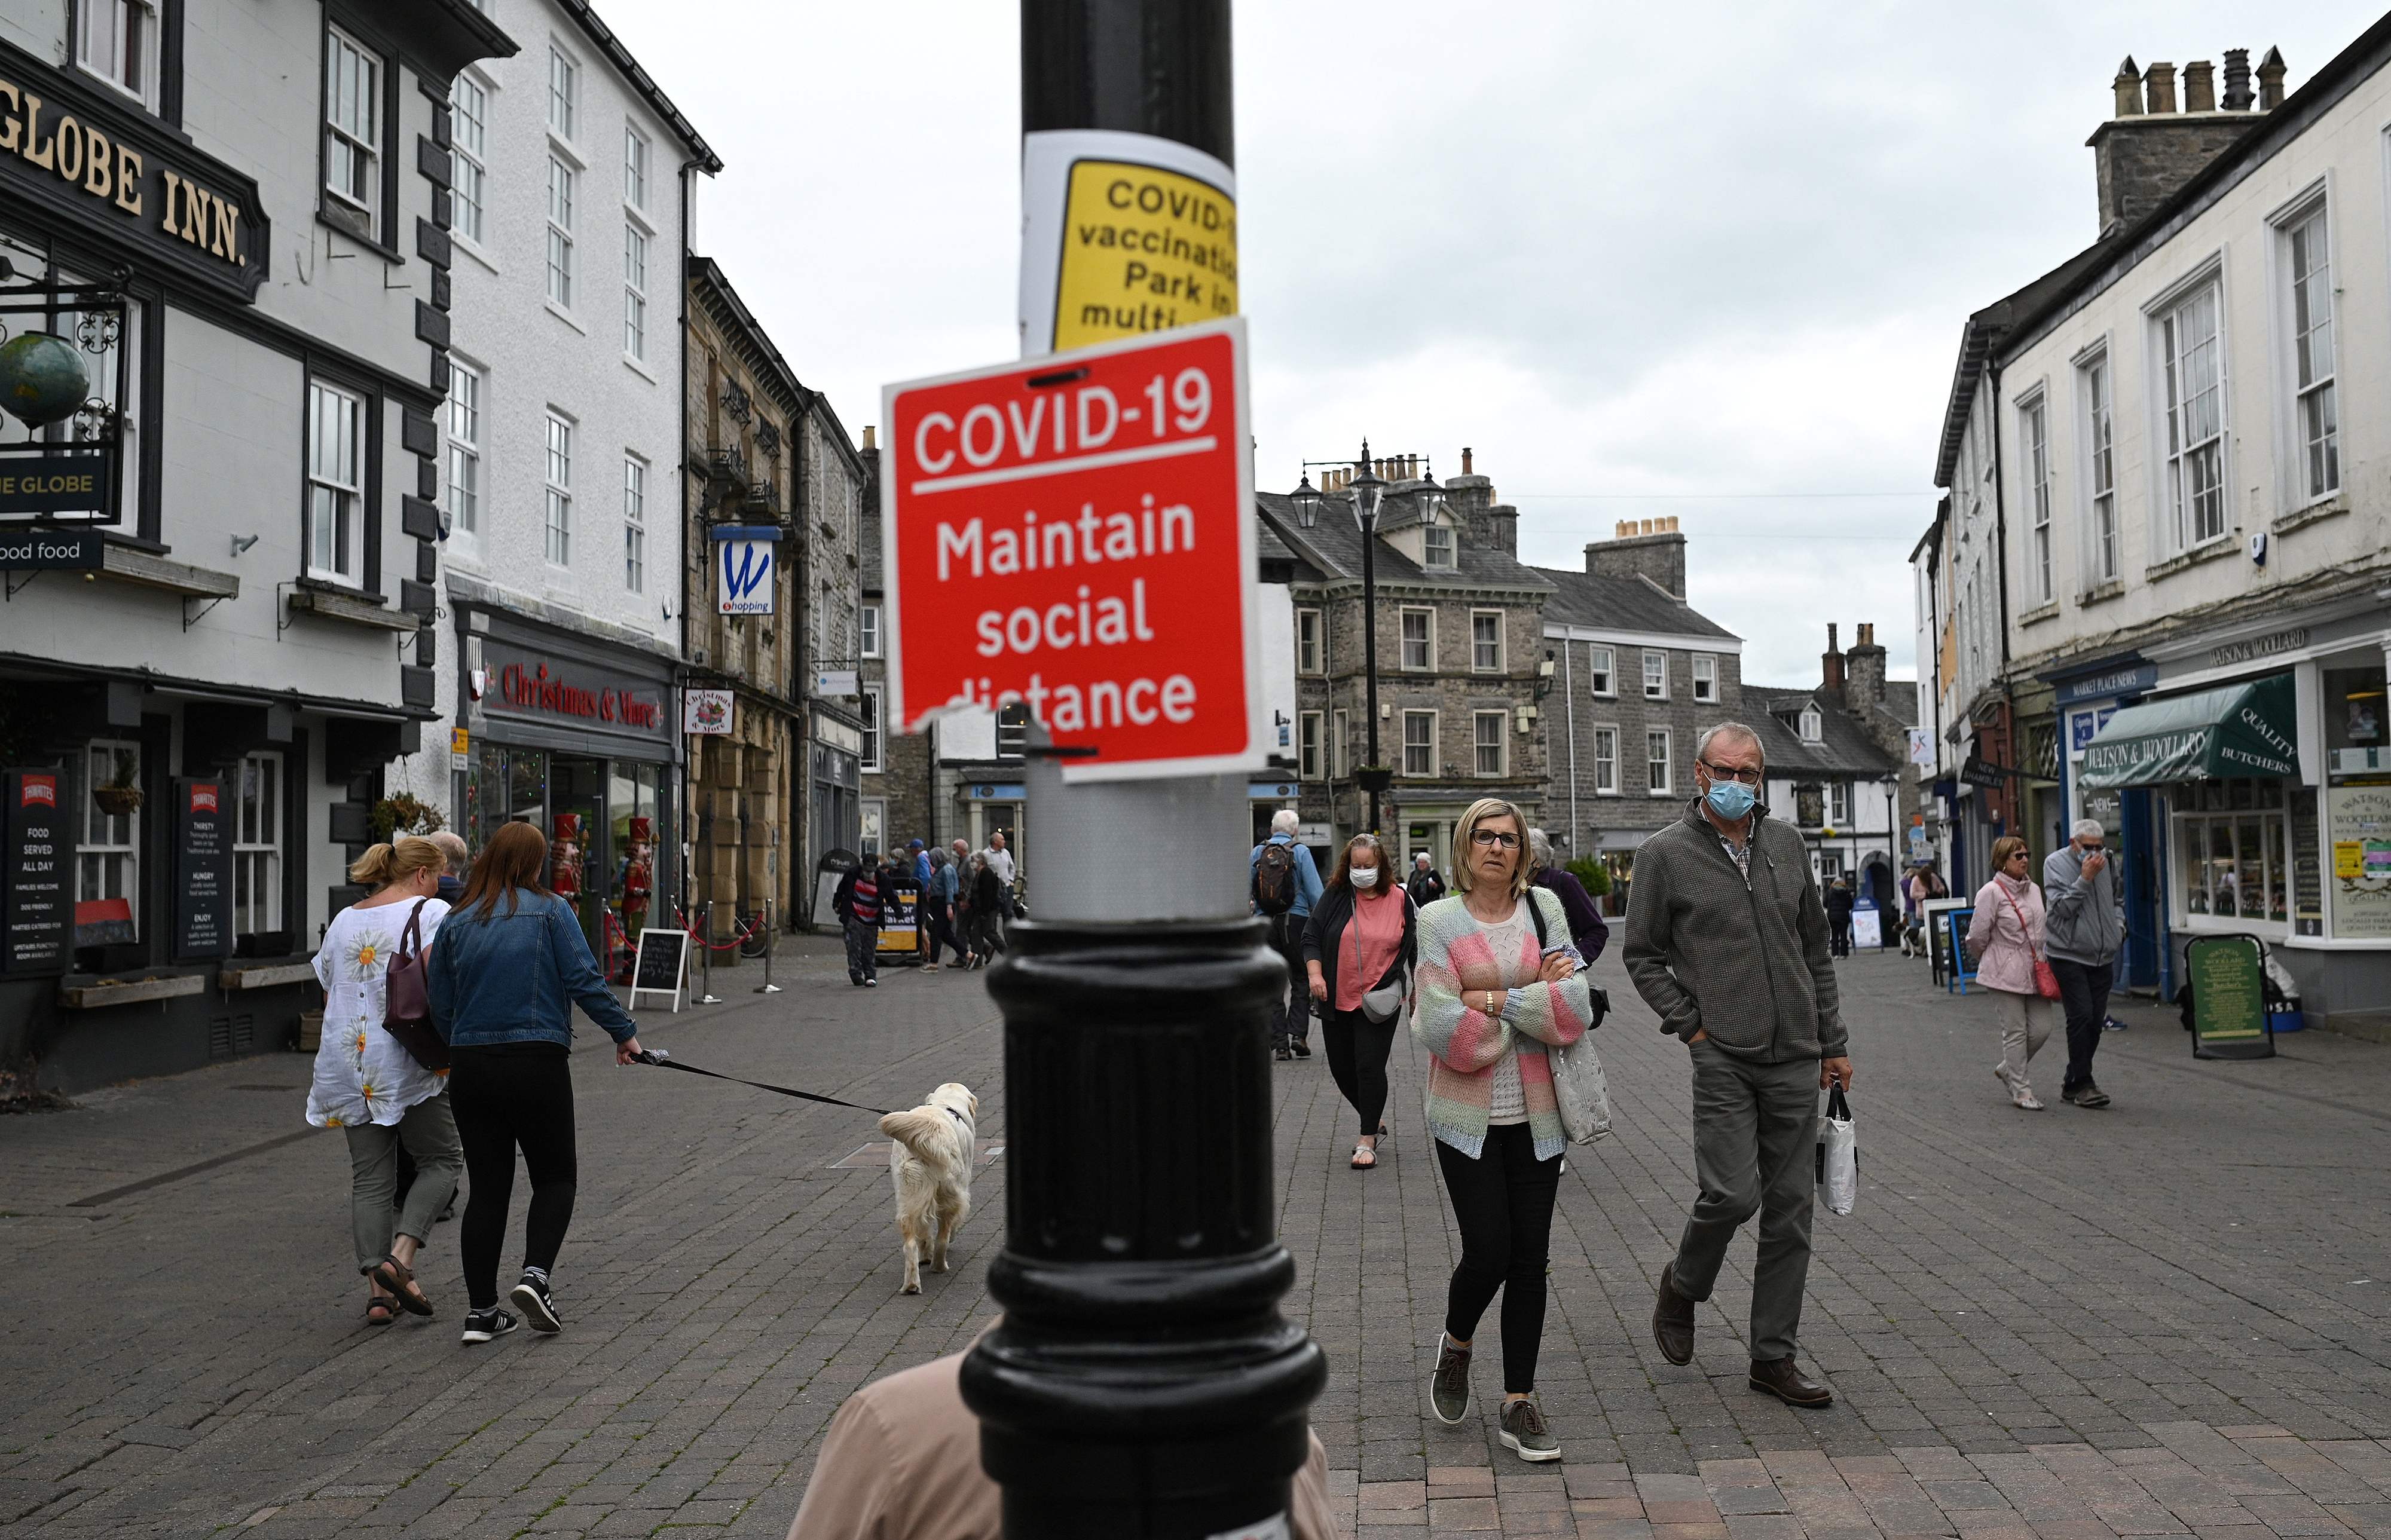 Members of the public walk past shops in Kendal in Cumbria, north-west England